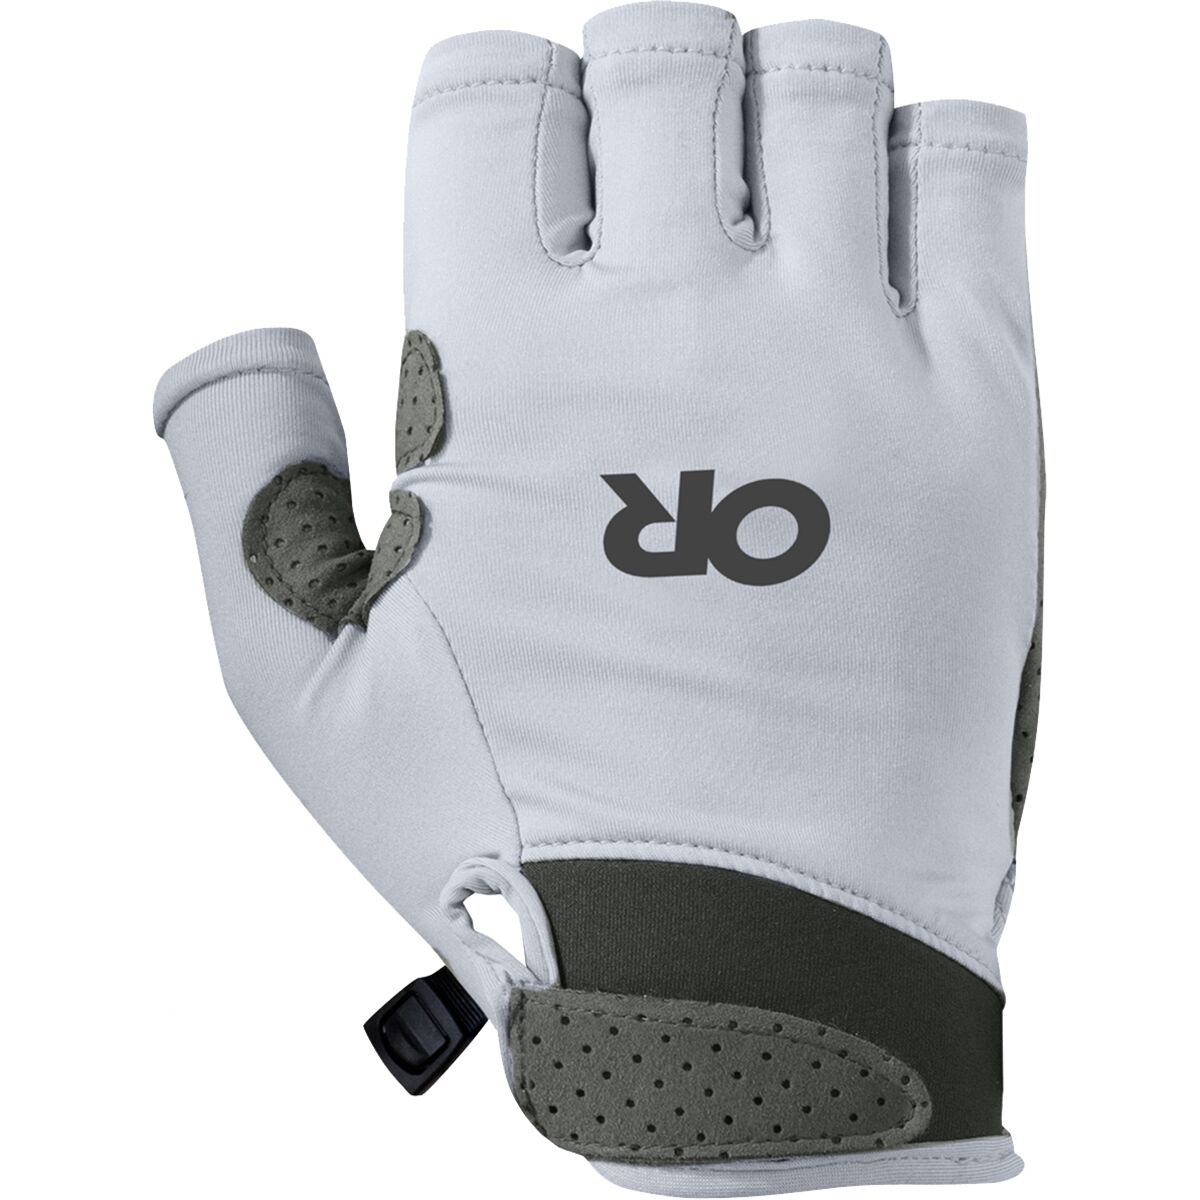 Outdoor Research Activeice Chroma Sun Glove - Accessories